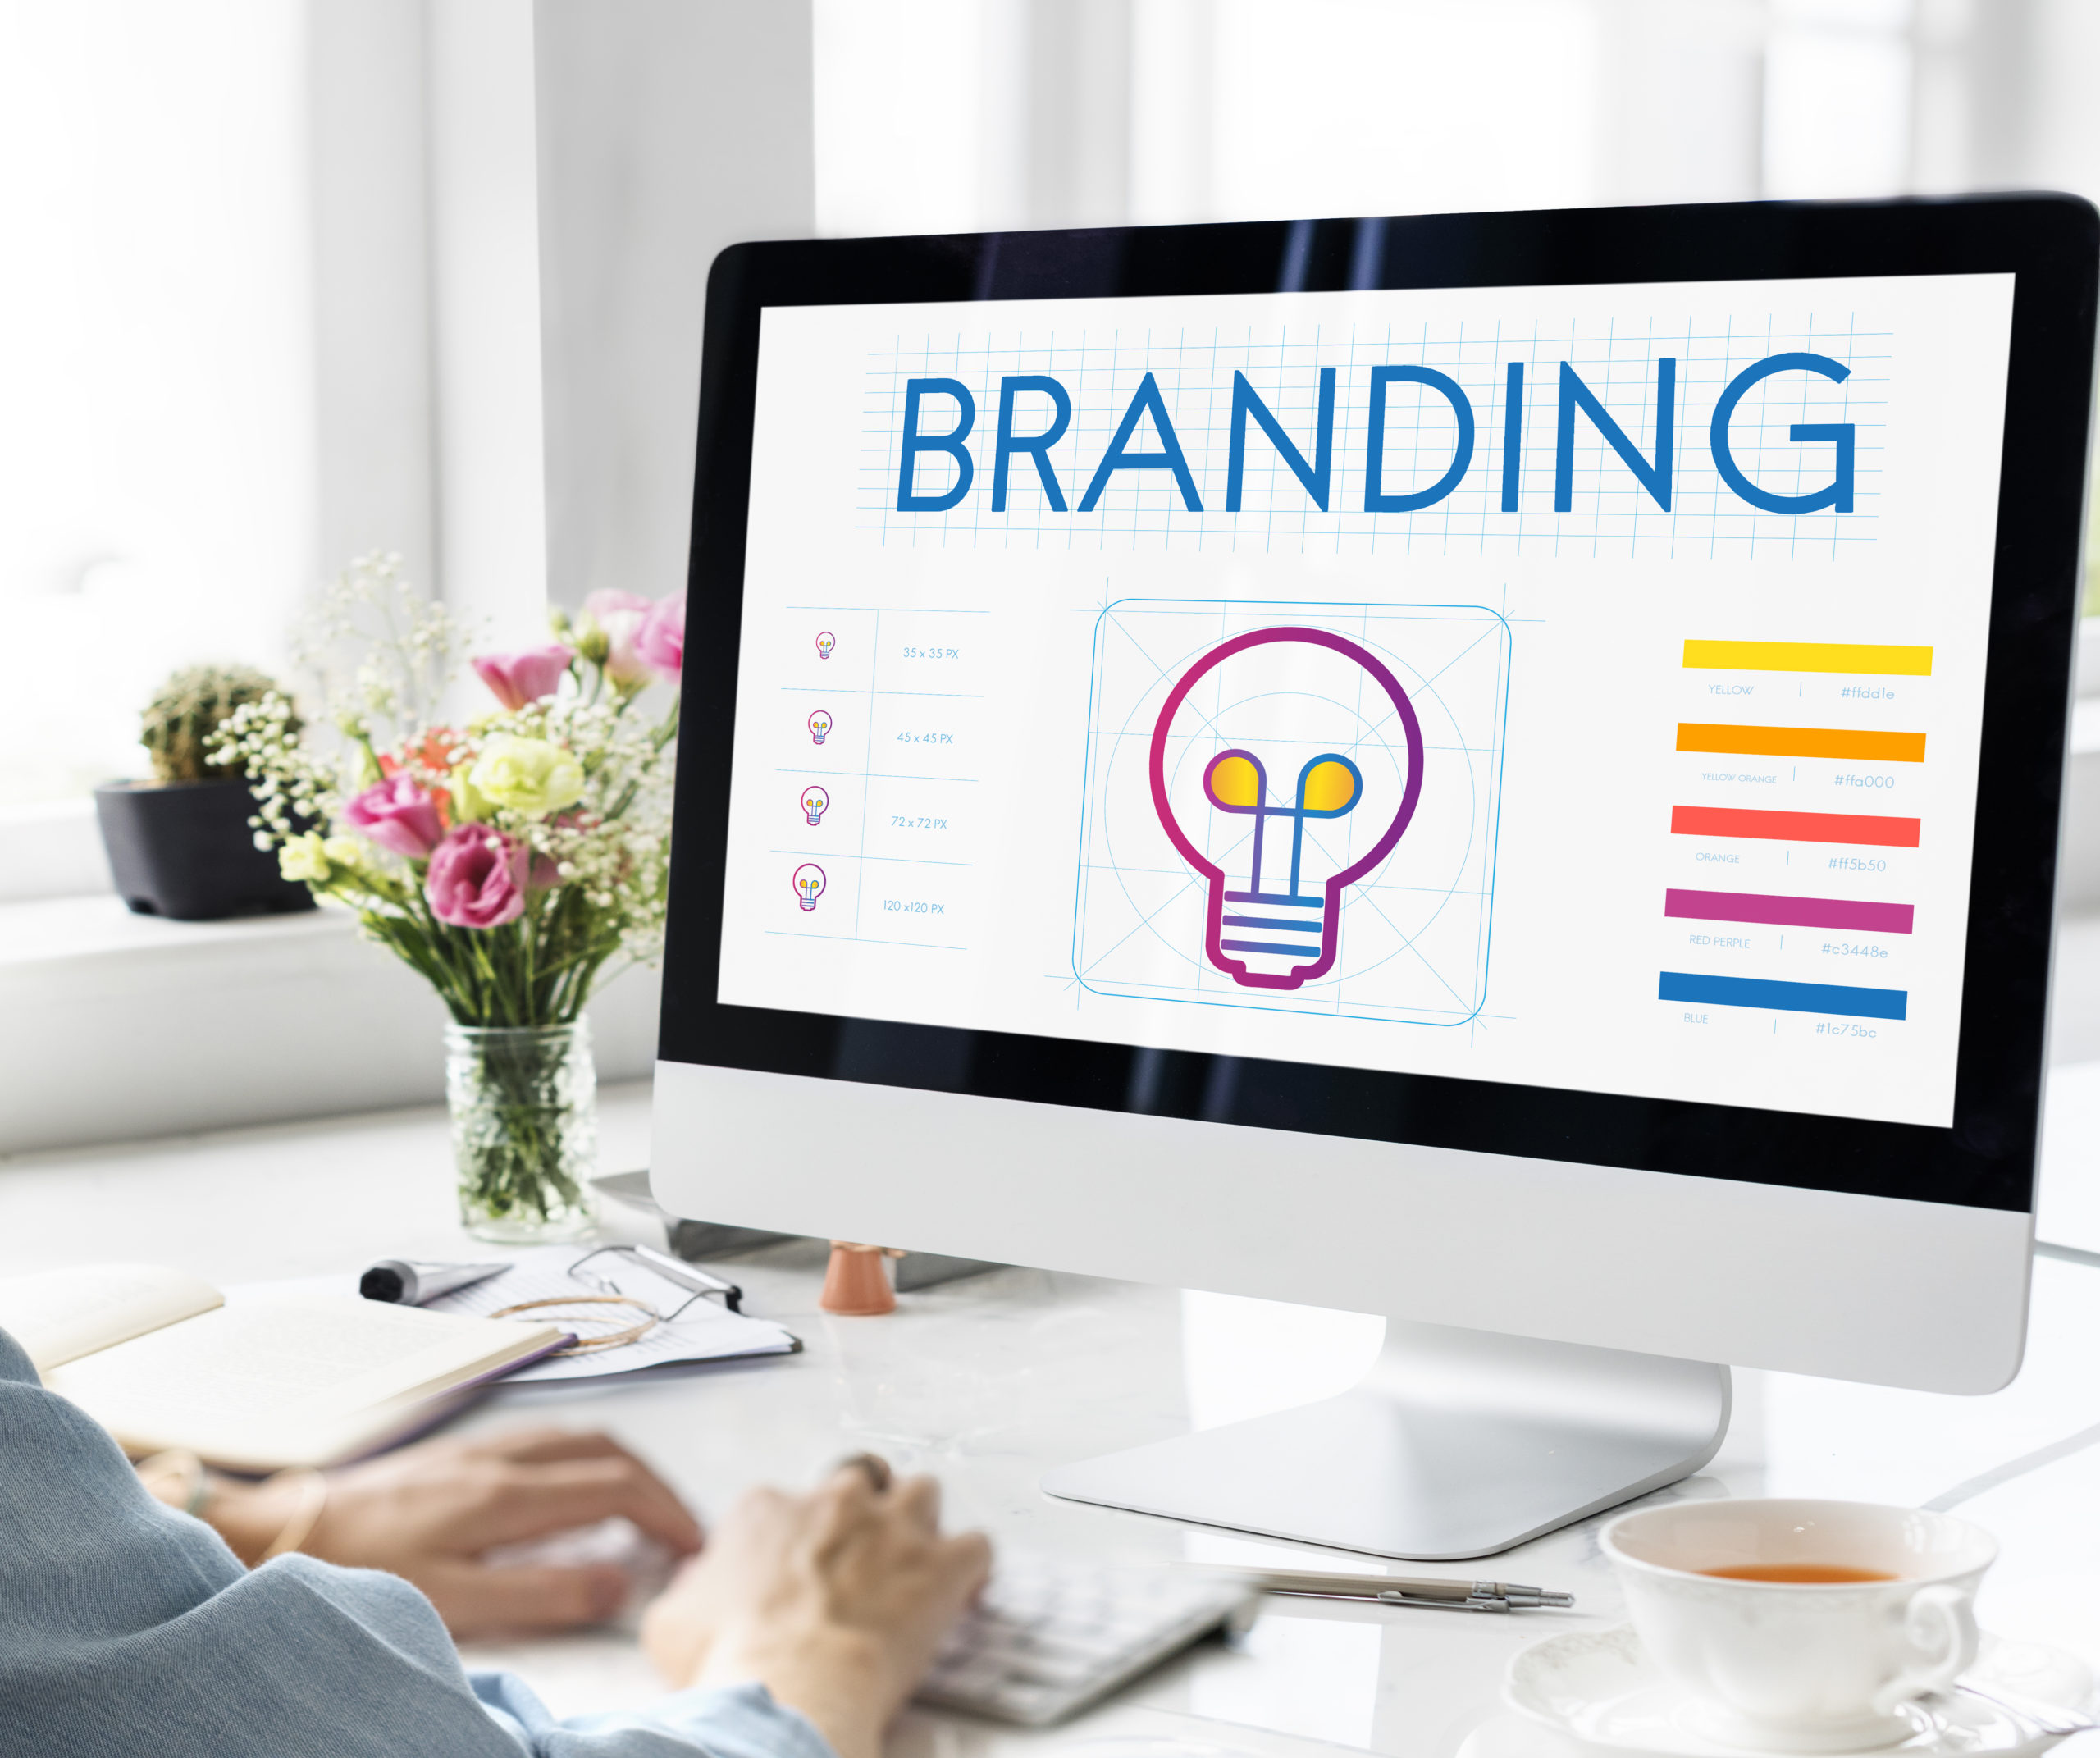 Branding: How To Make A Lasting Impression